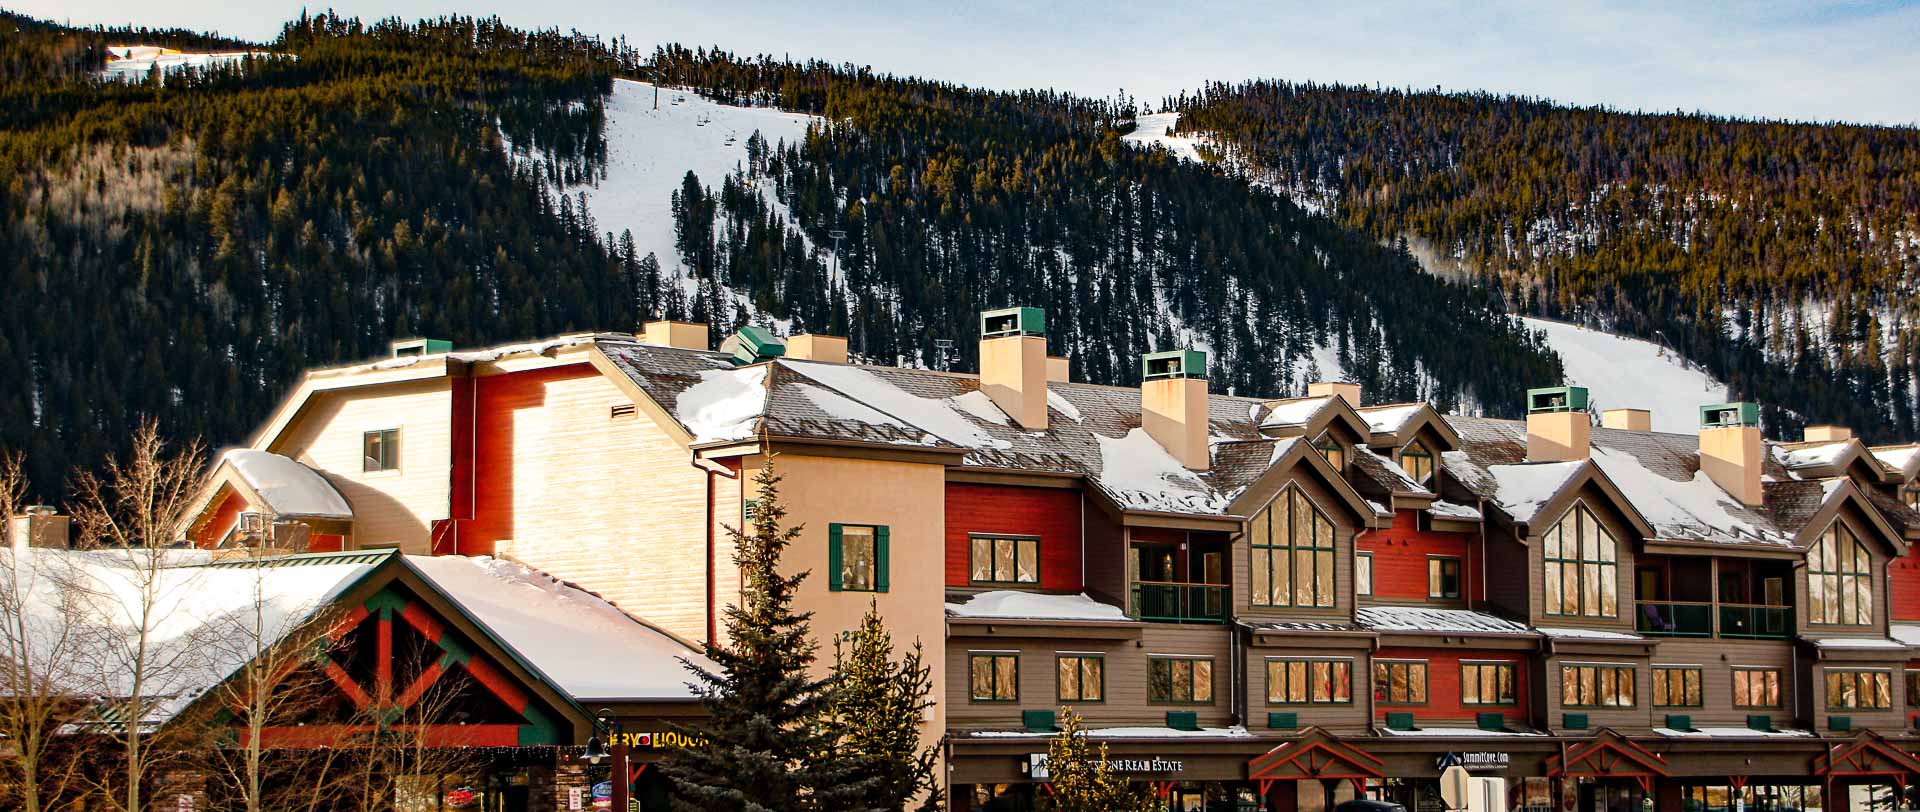 Keystone Condo Rentals, GreatRentalKeystone 4br4ba by Owner Vacation Rental, 
Walk to Lifts & More... at The Gateway Mountain Lodge. Located in River Run at Keystone Resort, Summit County Colorado. 
Lodging, lift tickets & equipment Discounts available.